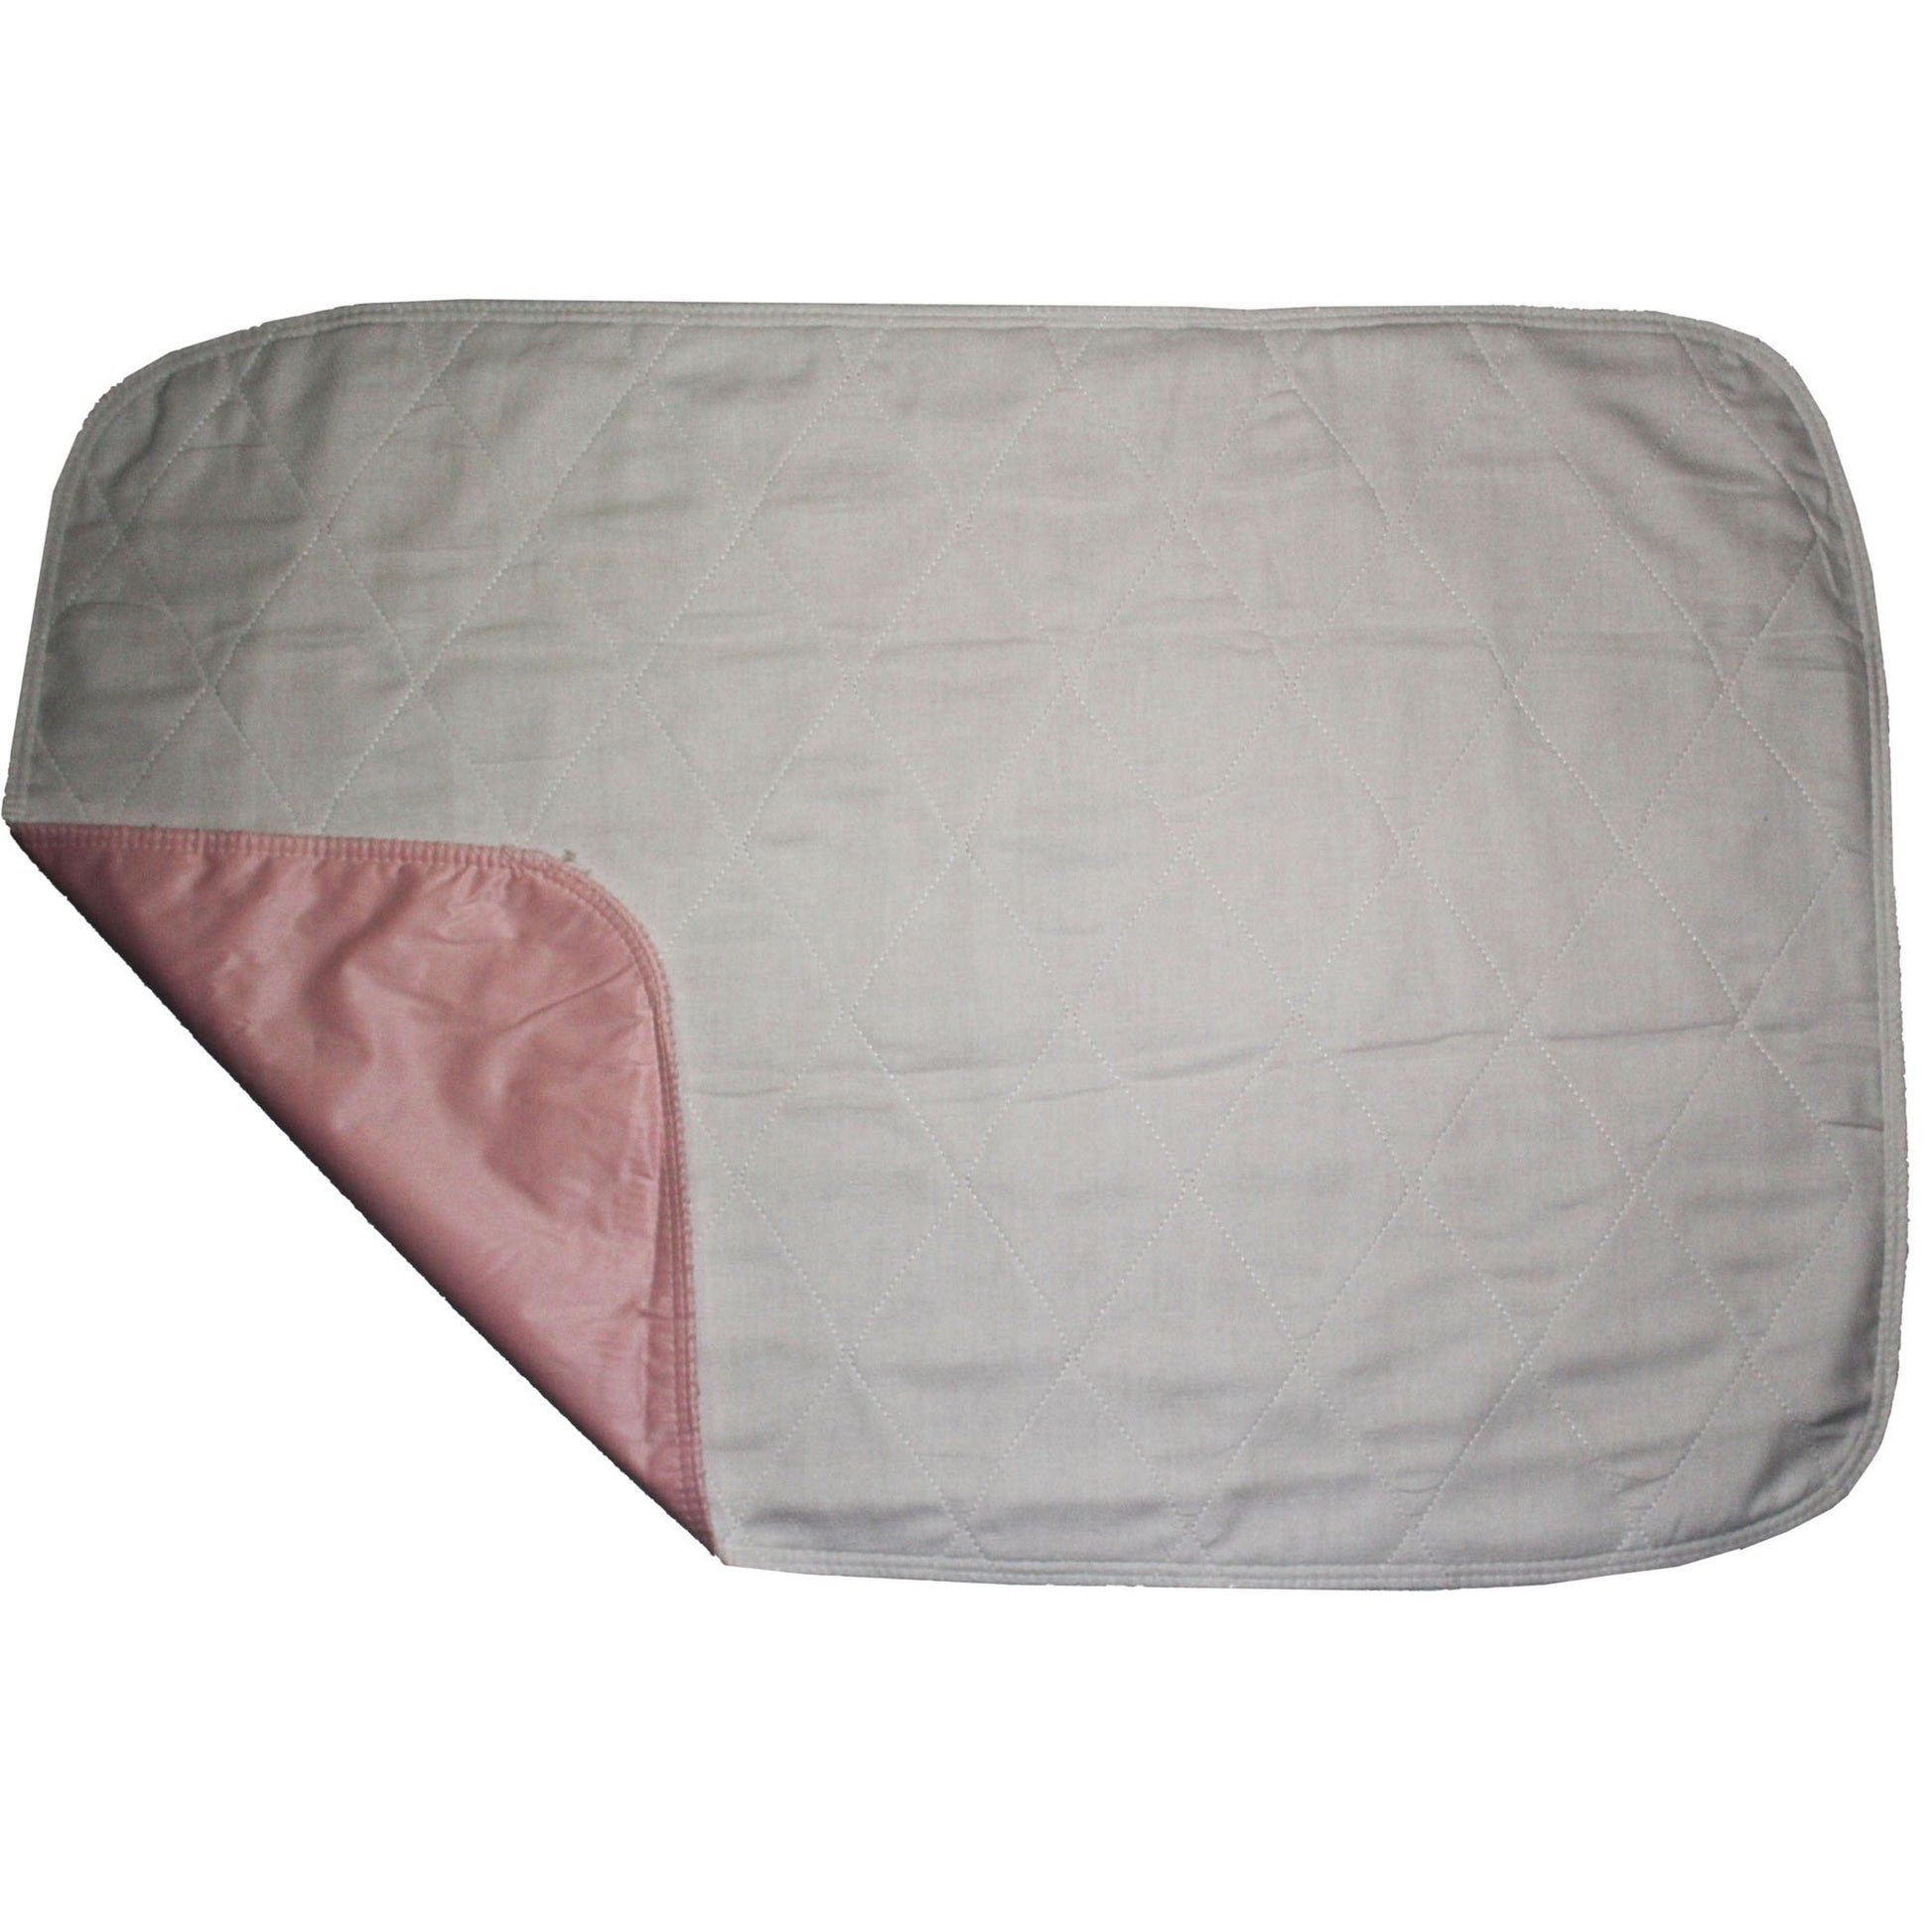 Beck'S Classic Birdseye Underpad, 24 X 36 Inch, Sold As 1/Each Beck'S Bv7124Pb